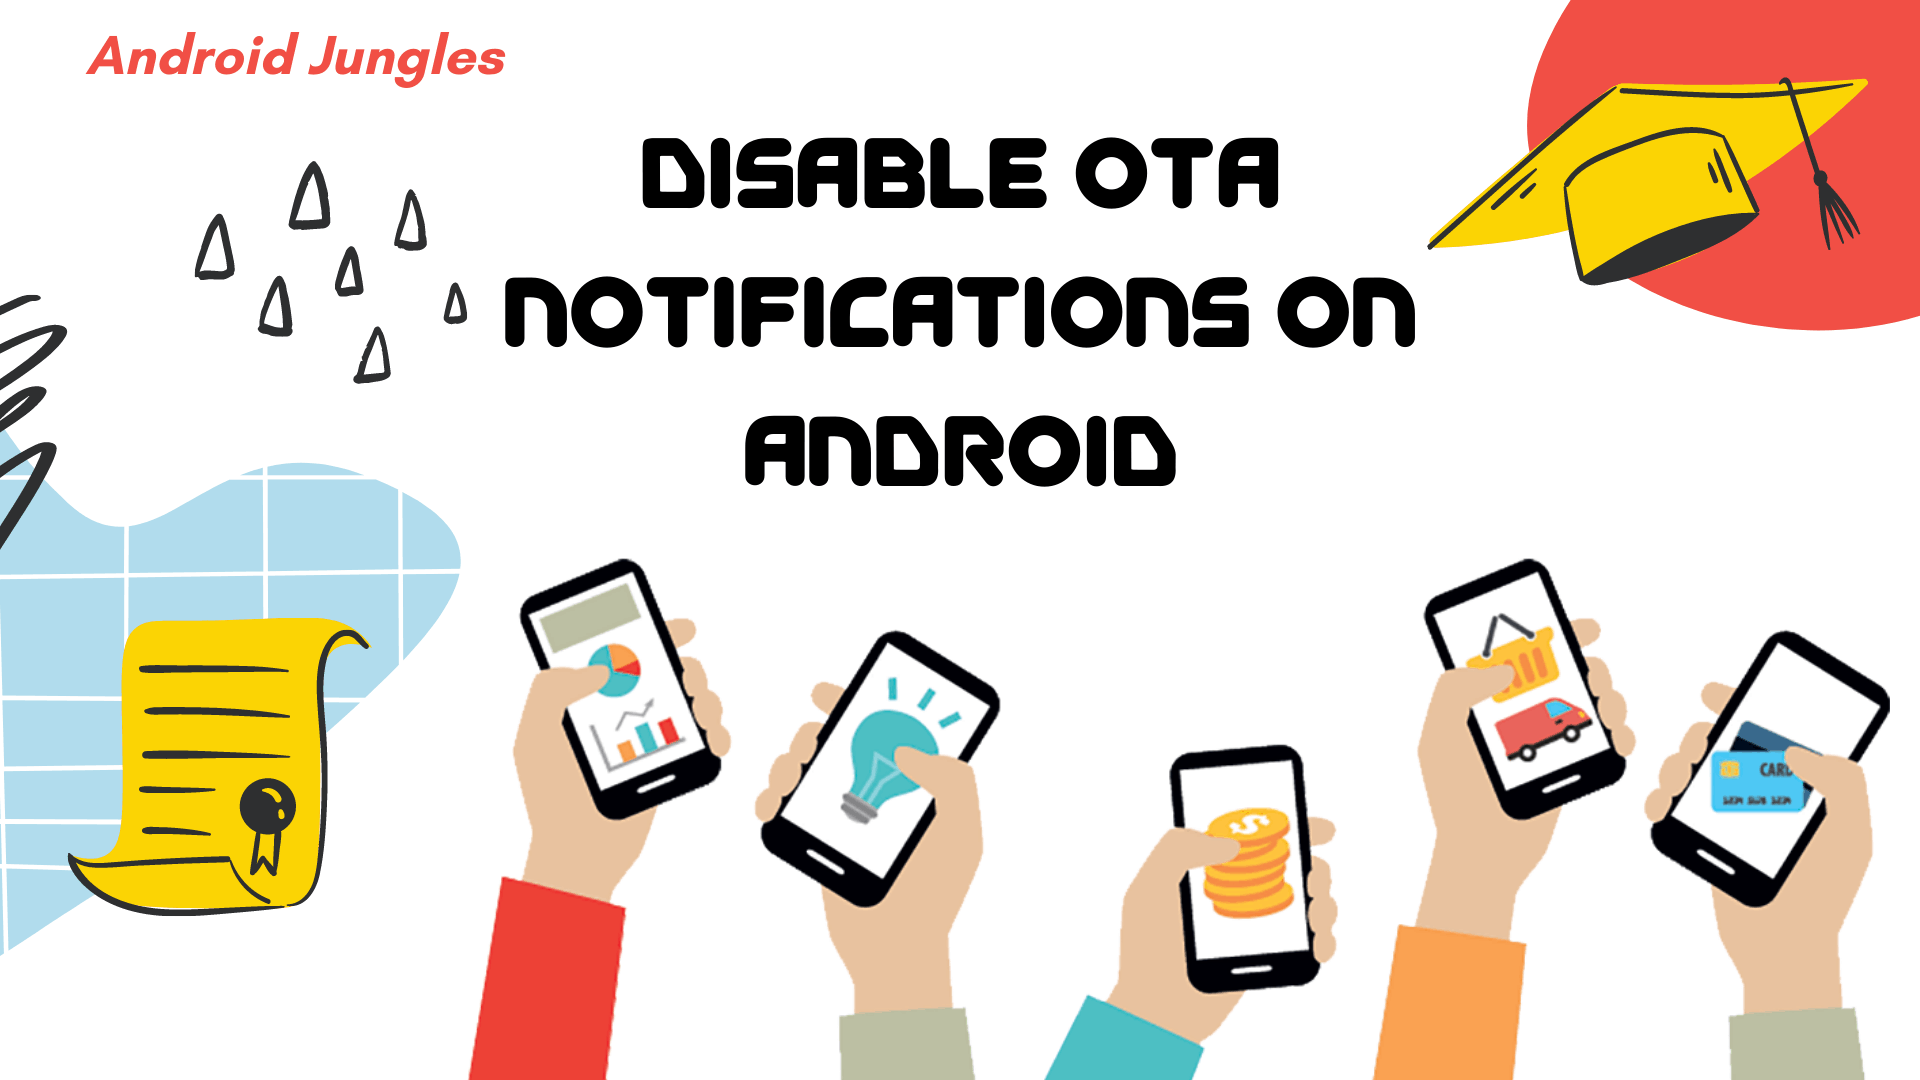 How to Disable OTA Notifications on Android? [2022]